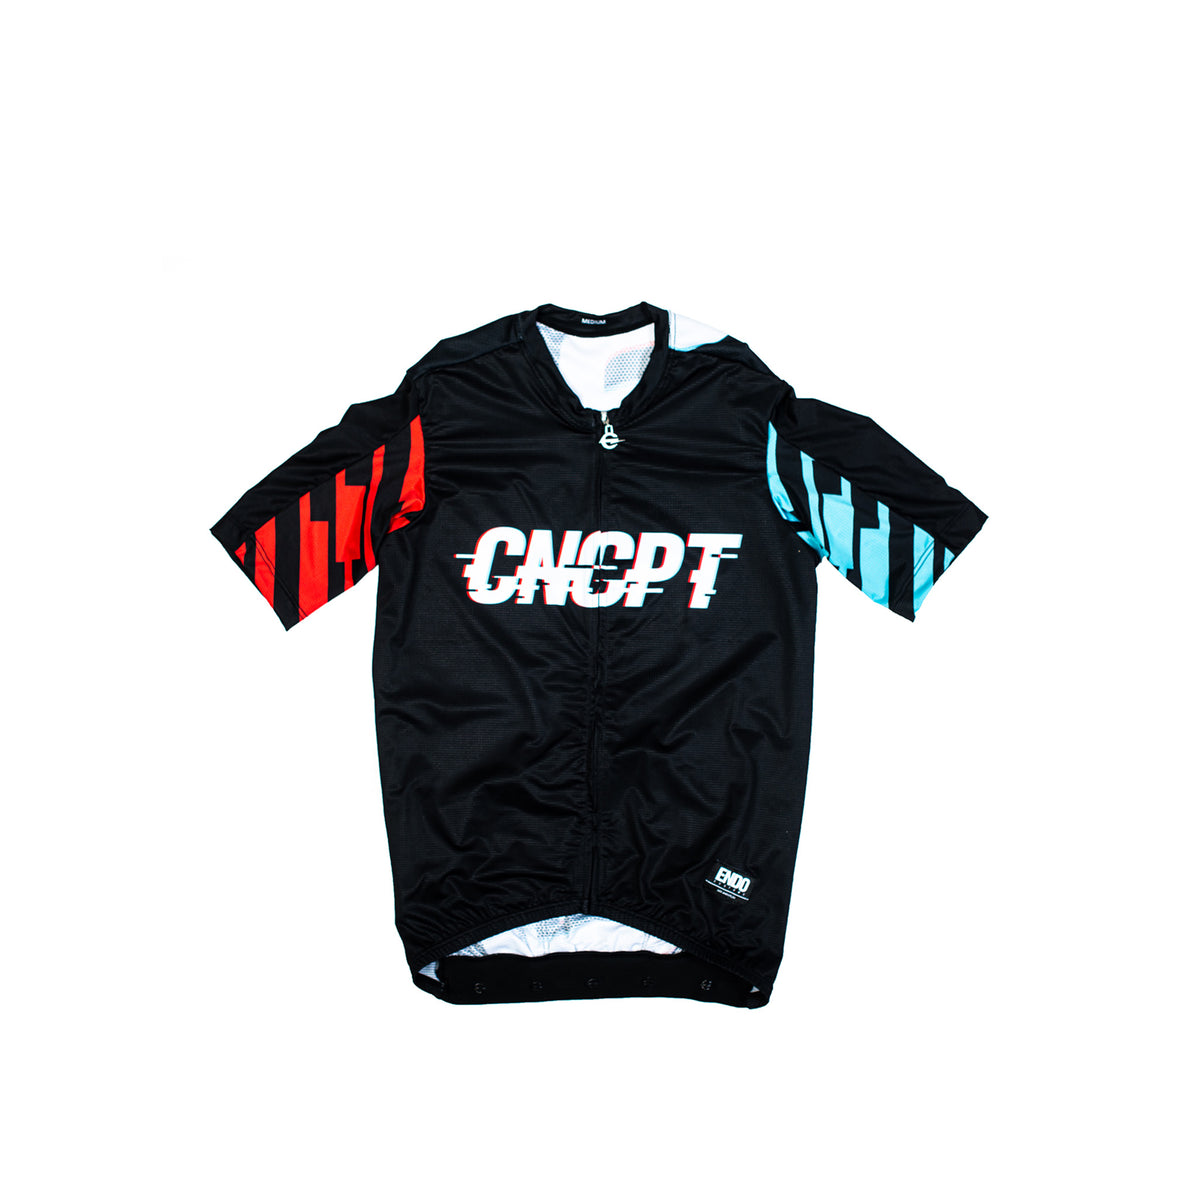 CNCPT - ANAGLYPH - LADERA JERSEY - BLACK